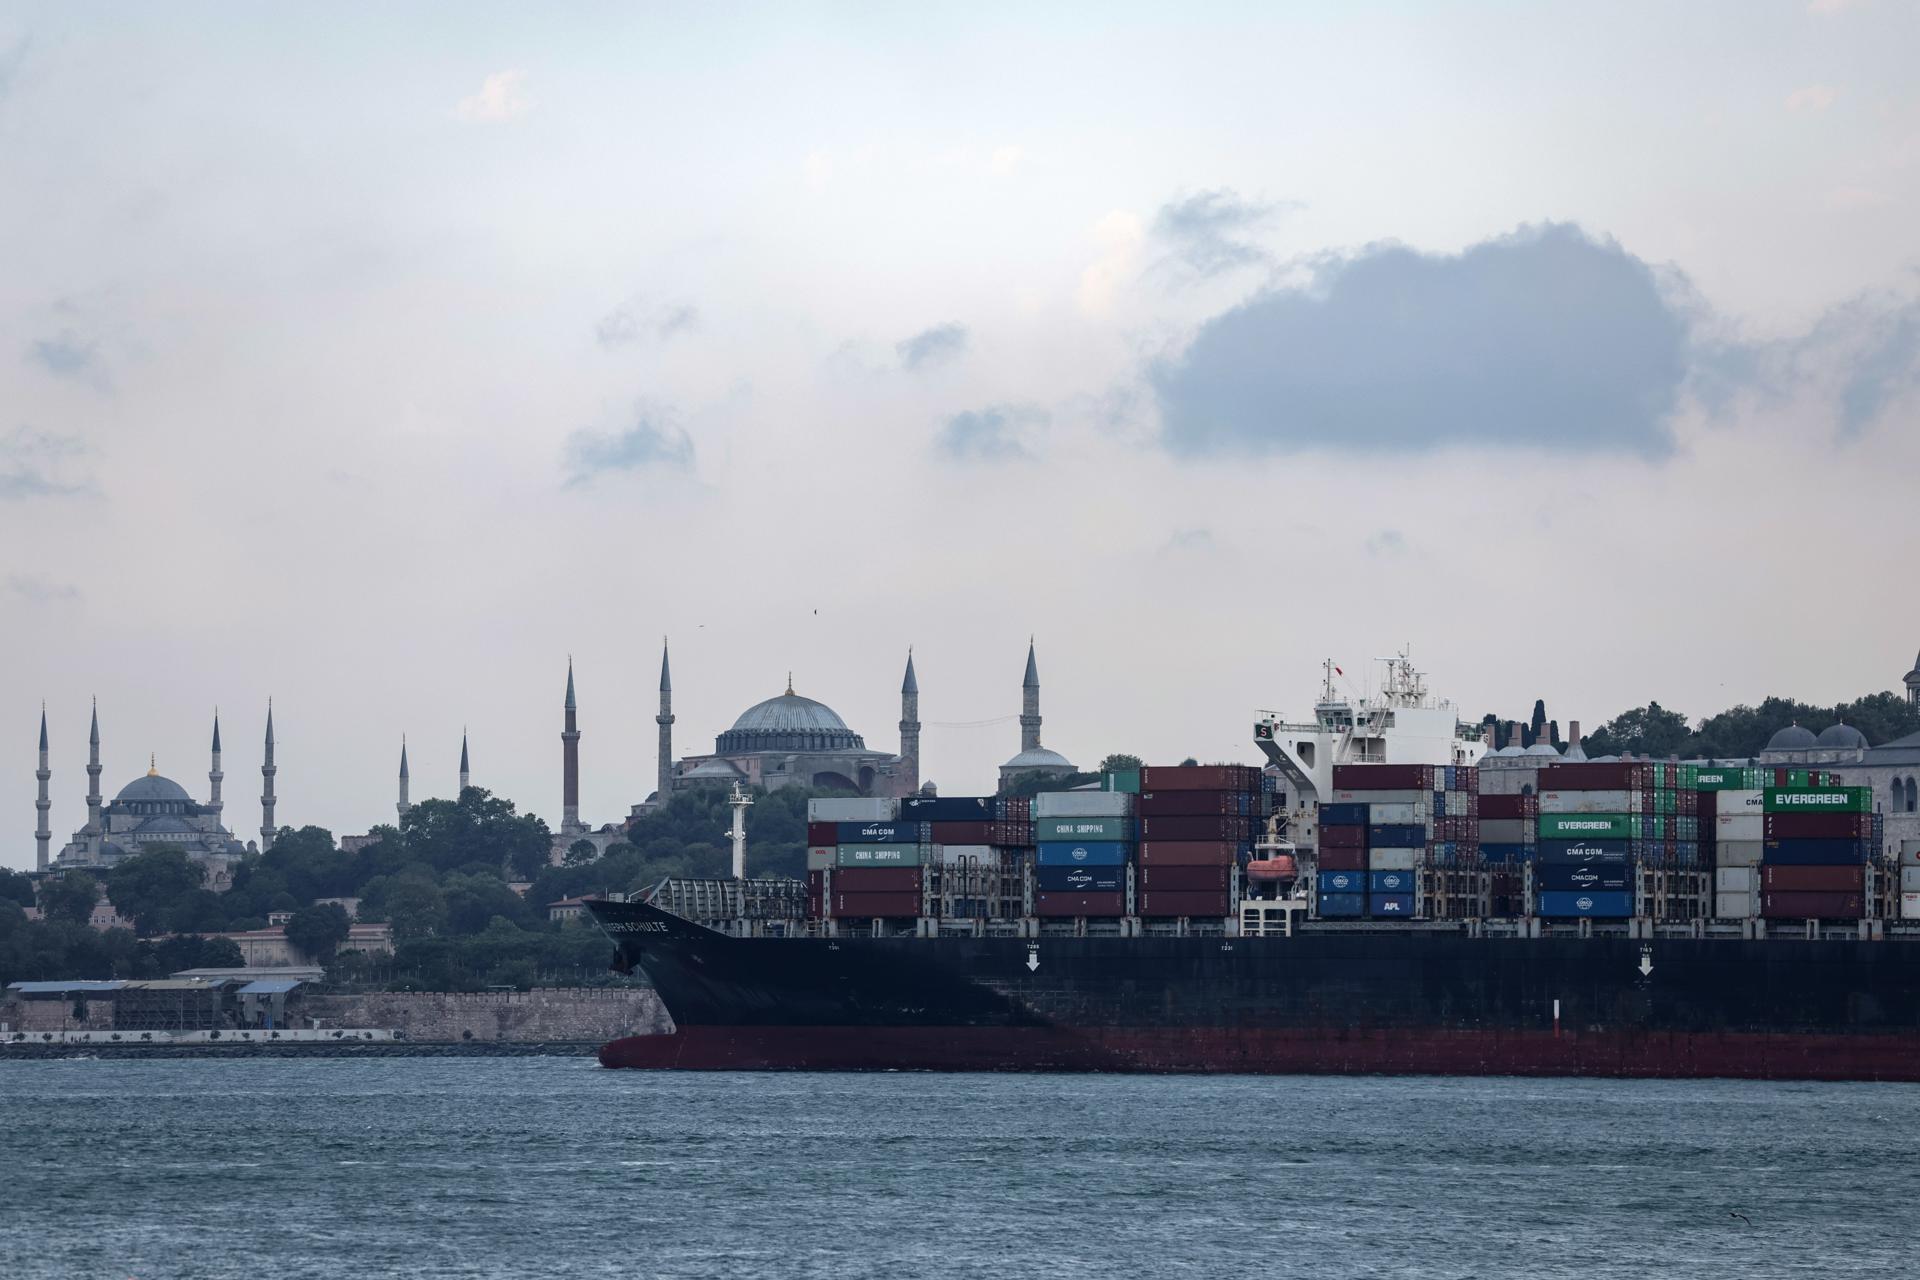 The Hong Kong-flagged Joseph Schulte, the first cargo ship to leave Ukraine's Odesa port since the end of the grain deal despite Russian threats, sails in front of the Hagia Sophia Grand Mosque and the Blue Mosque on the Bosphorus in Istanbul, Turkey, 18 August 2023. EFE-EPA/ERDEM SAHIN